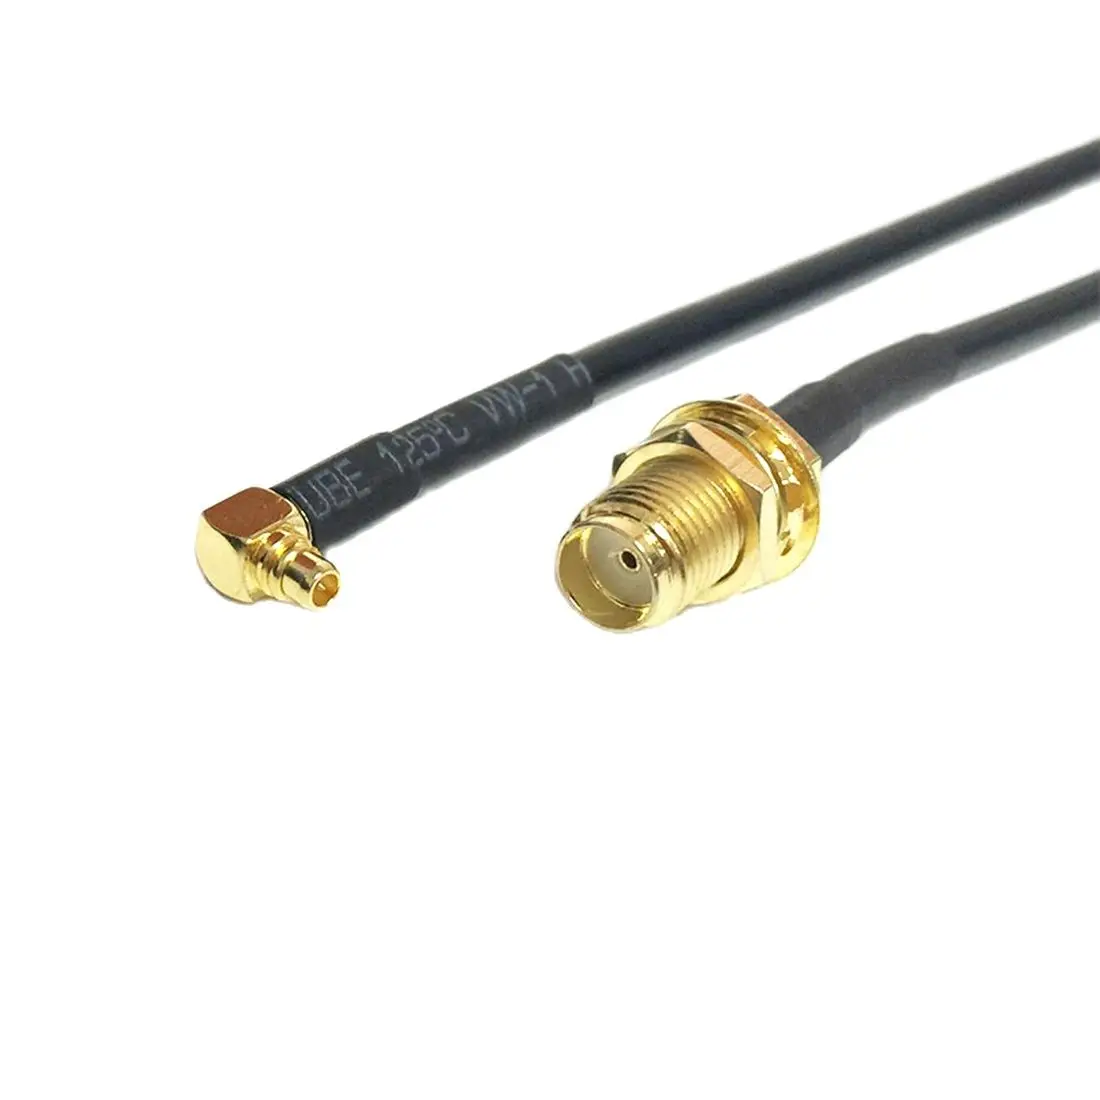 

SMA Female Jack Nut Switch MMCX Male Plug Right Angle Connector RG174 Cable 20cm/30cm/50cm/100cm Adapter Wholesale Fast Ship